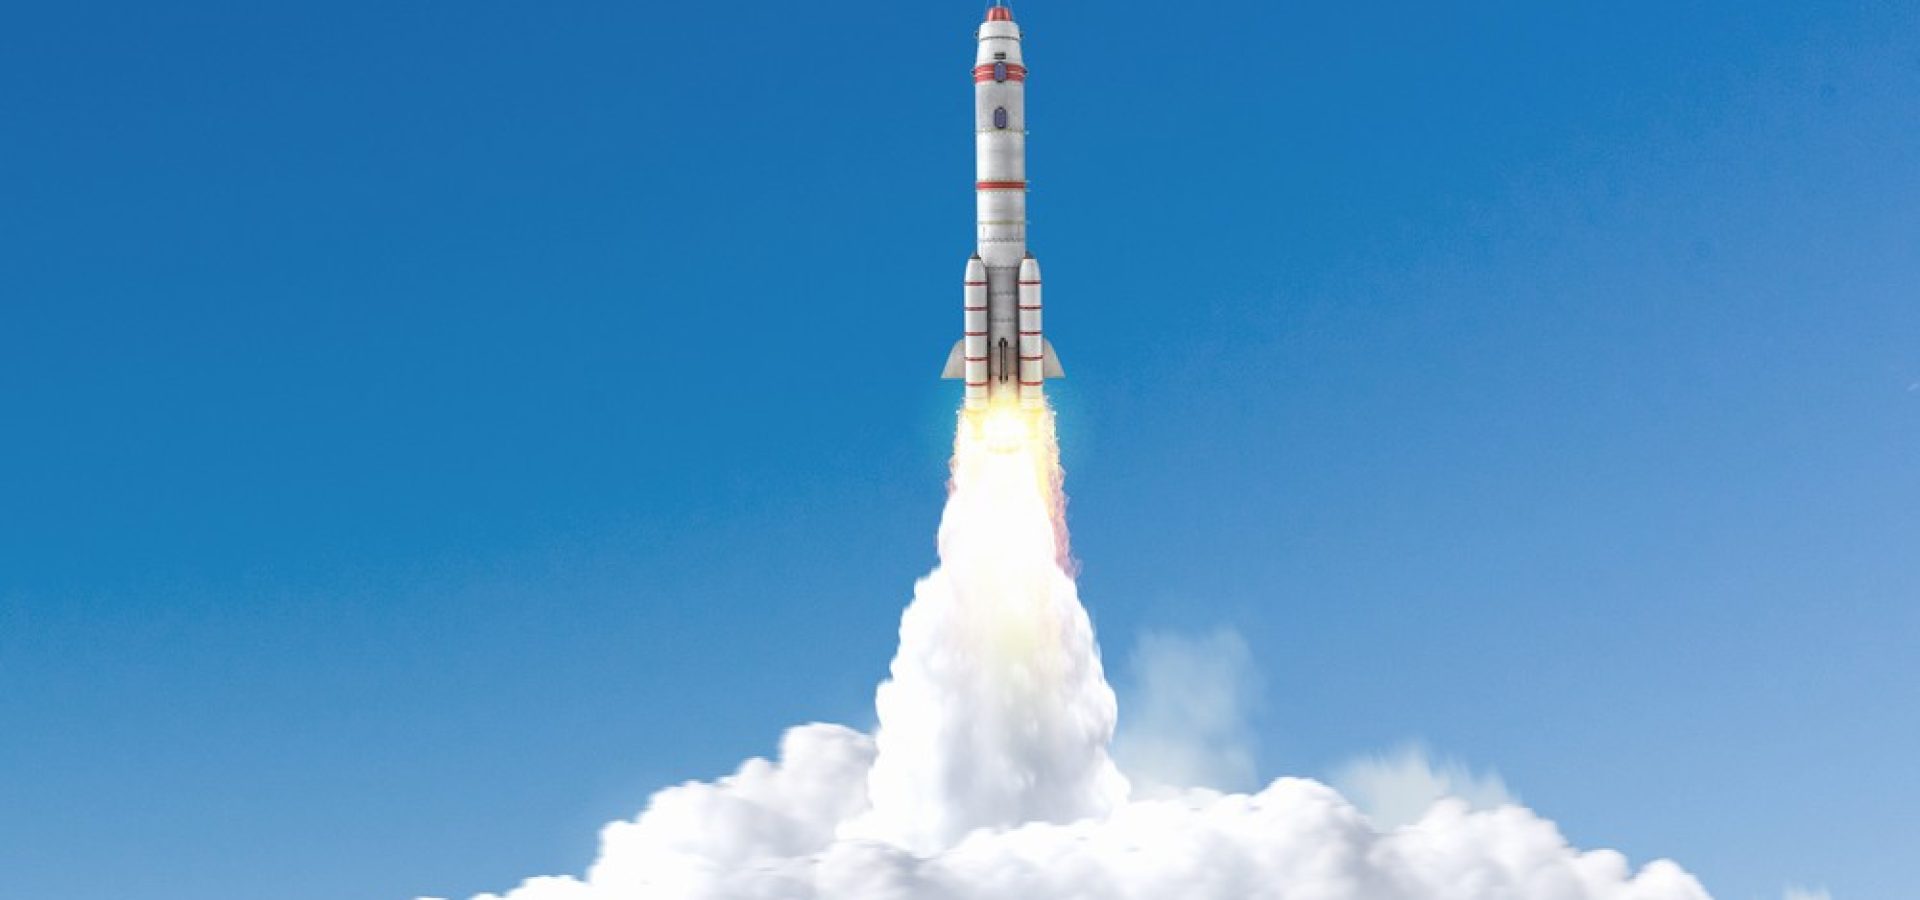 Chinese rocket Debris falls into the Indian Ocean